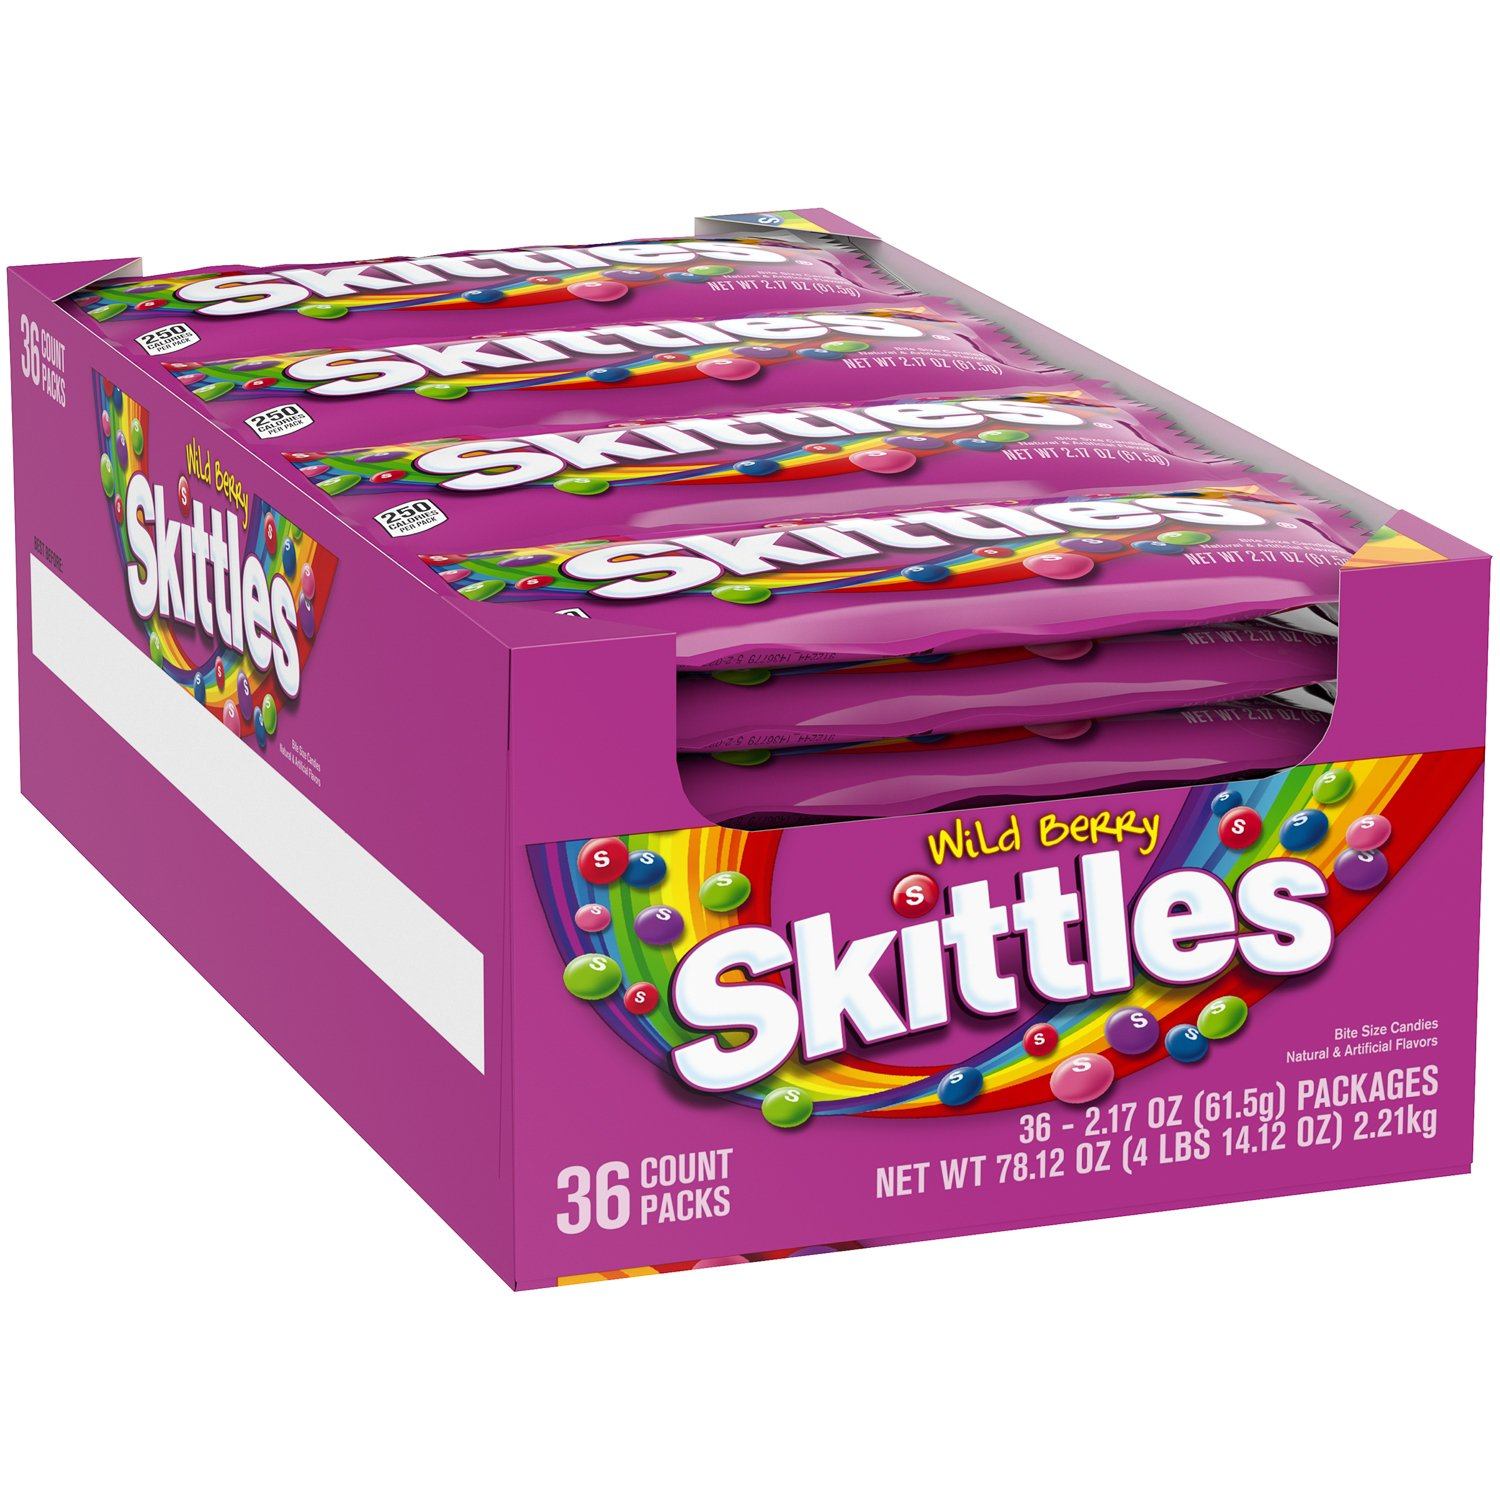 Skittles Candy Skittles Wild Berry 2.17 Oz-36 Count 